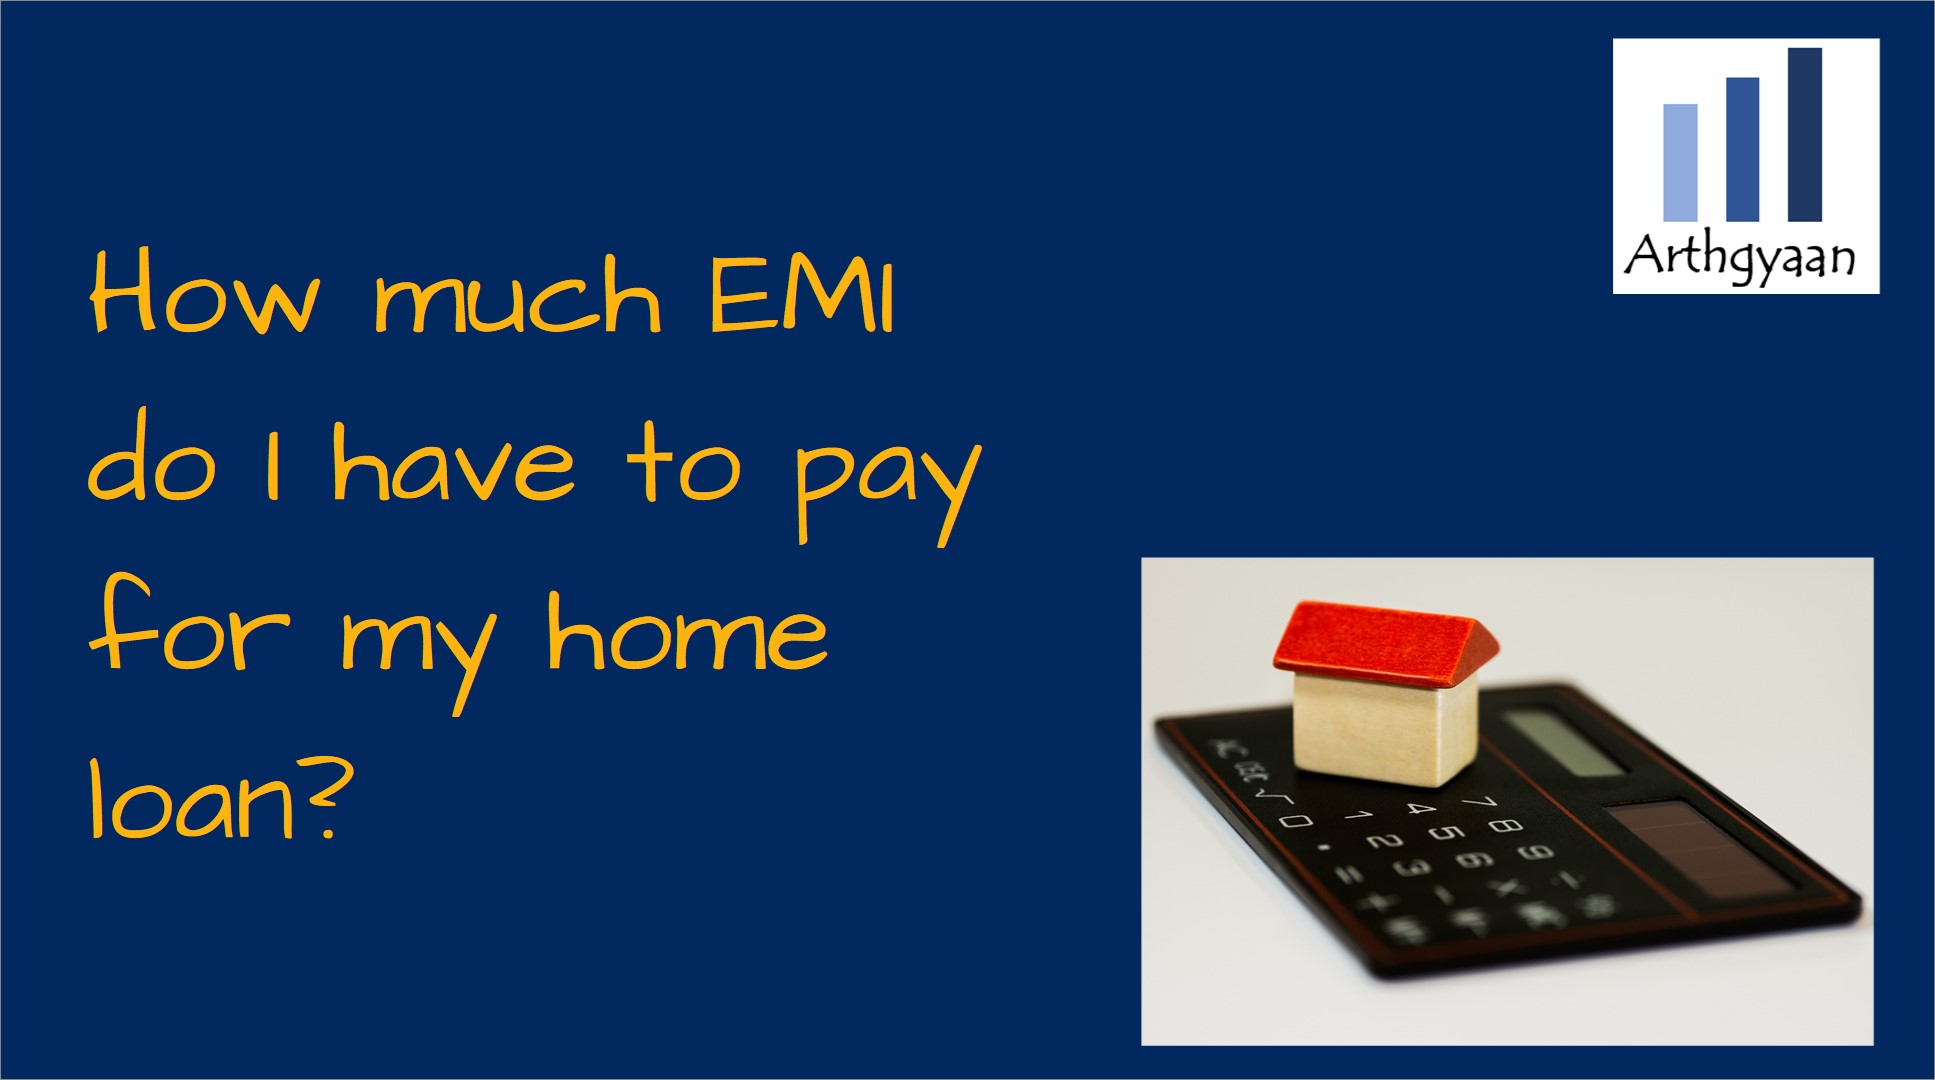 <p>This article shows a handy ready reckoner for home loan EMI amounts for all tenures and interest rates along with the amount of principal and interest to be paid.</p>

